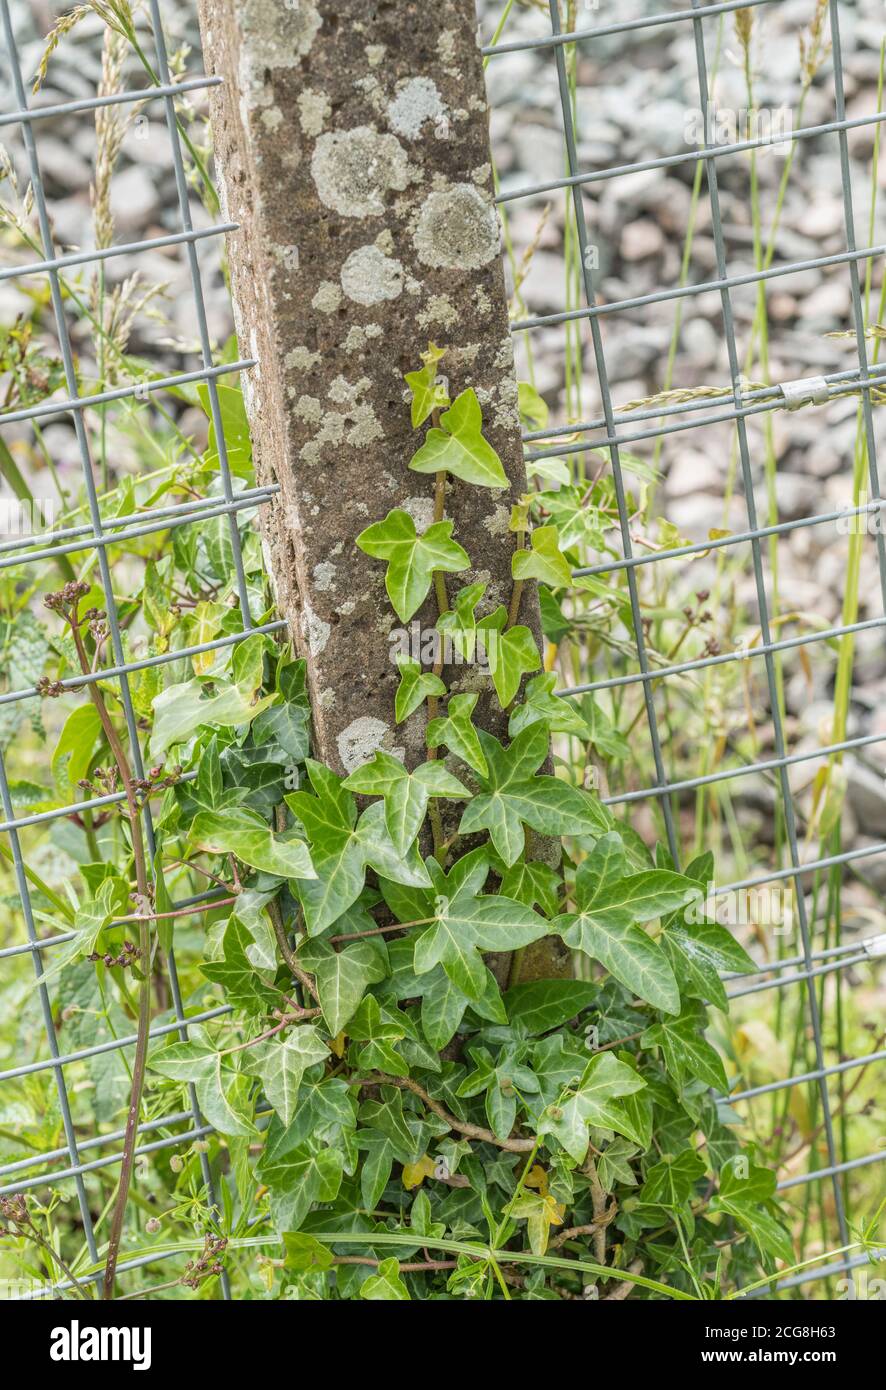 Climbing ivy / Common Ivy - Hedera helix - growing up the side of a concrete fence pole. Creeping ivy concept. Ivy plant on fence. Medicinal plant. Stock Photo